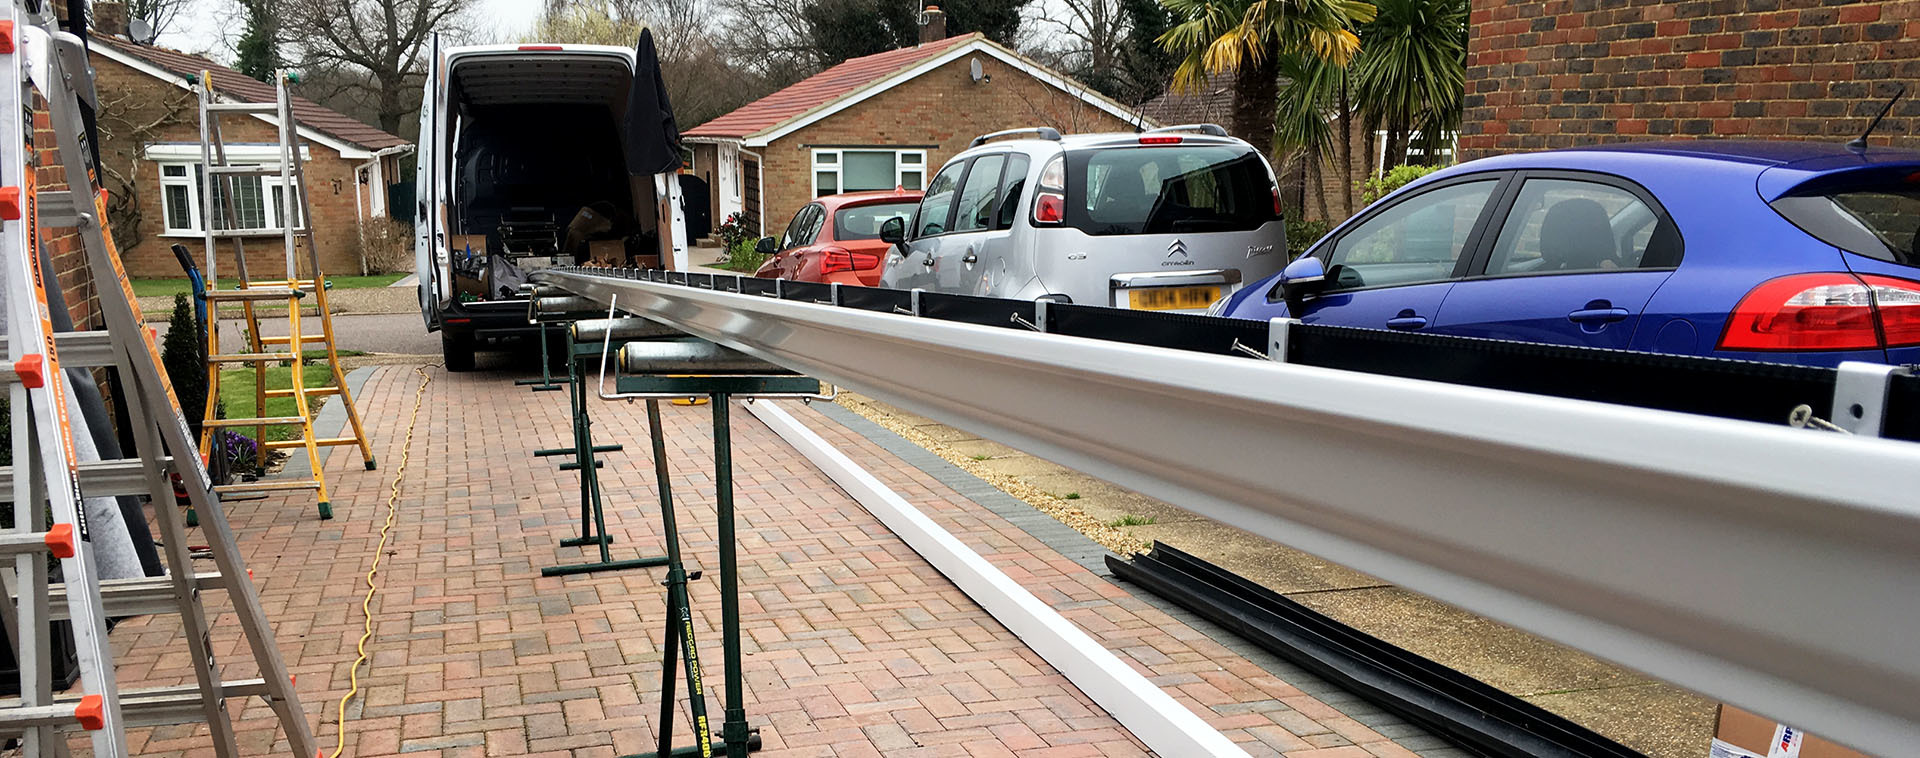 Long, continuous length of ogee aluminium guttering being extruded on-site at a domestic property.